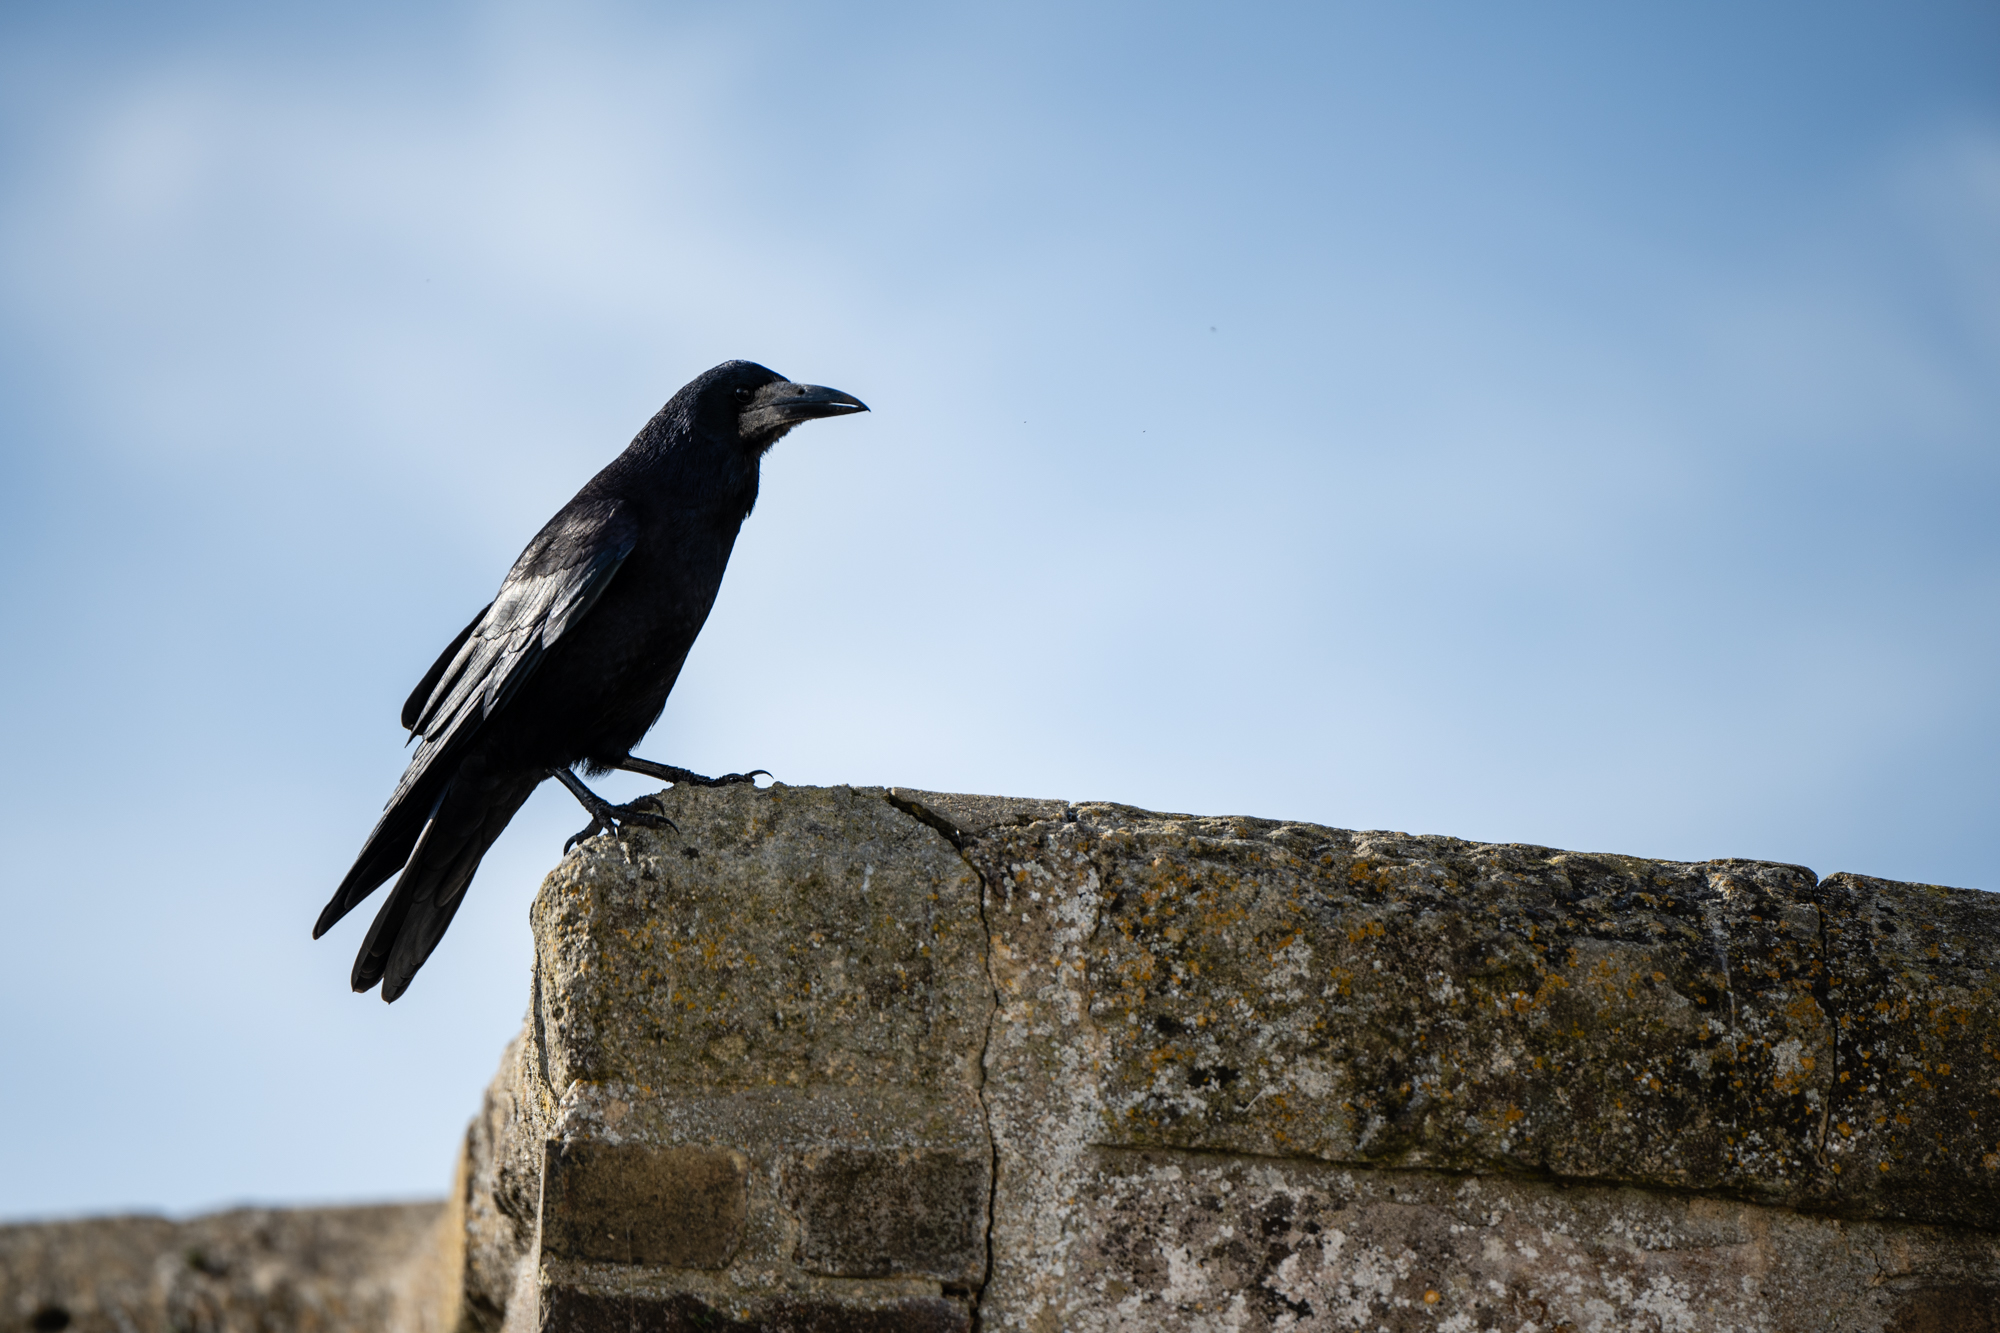 Photo of a crow on a wall taken with the Nikkor Z 70-180mm f/2.8